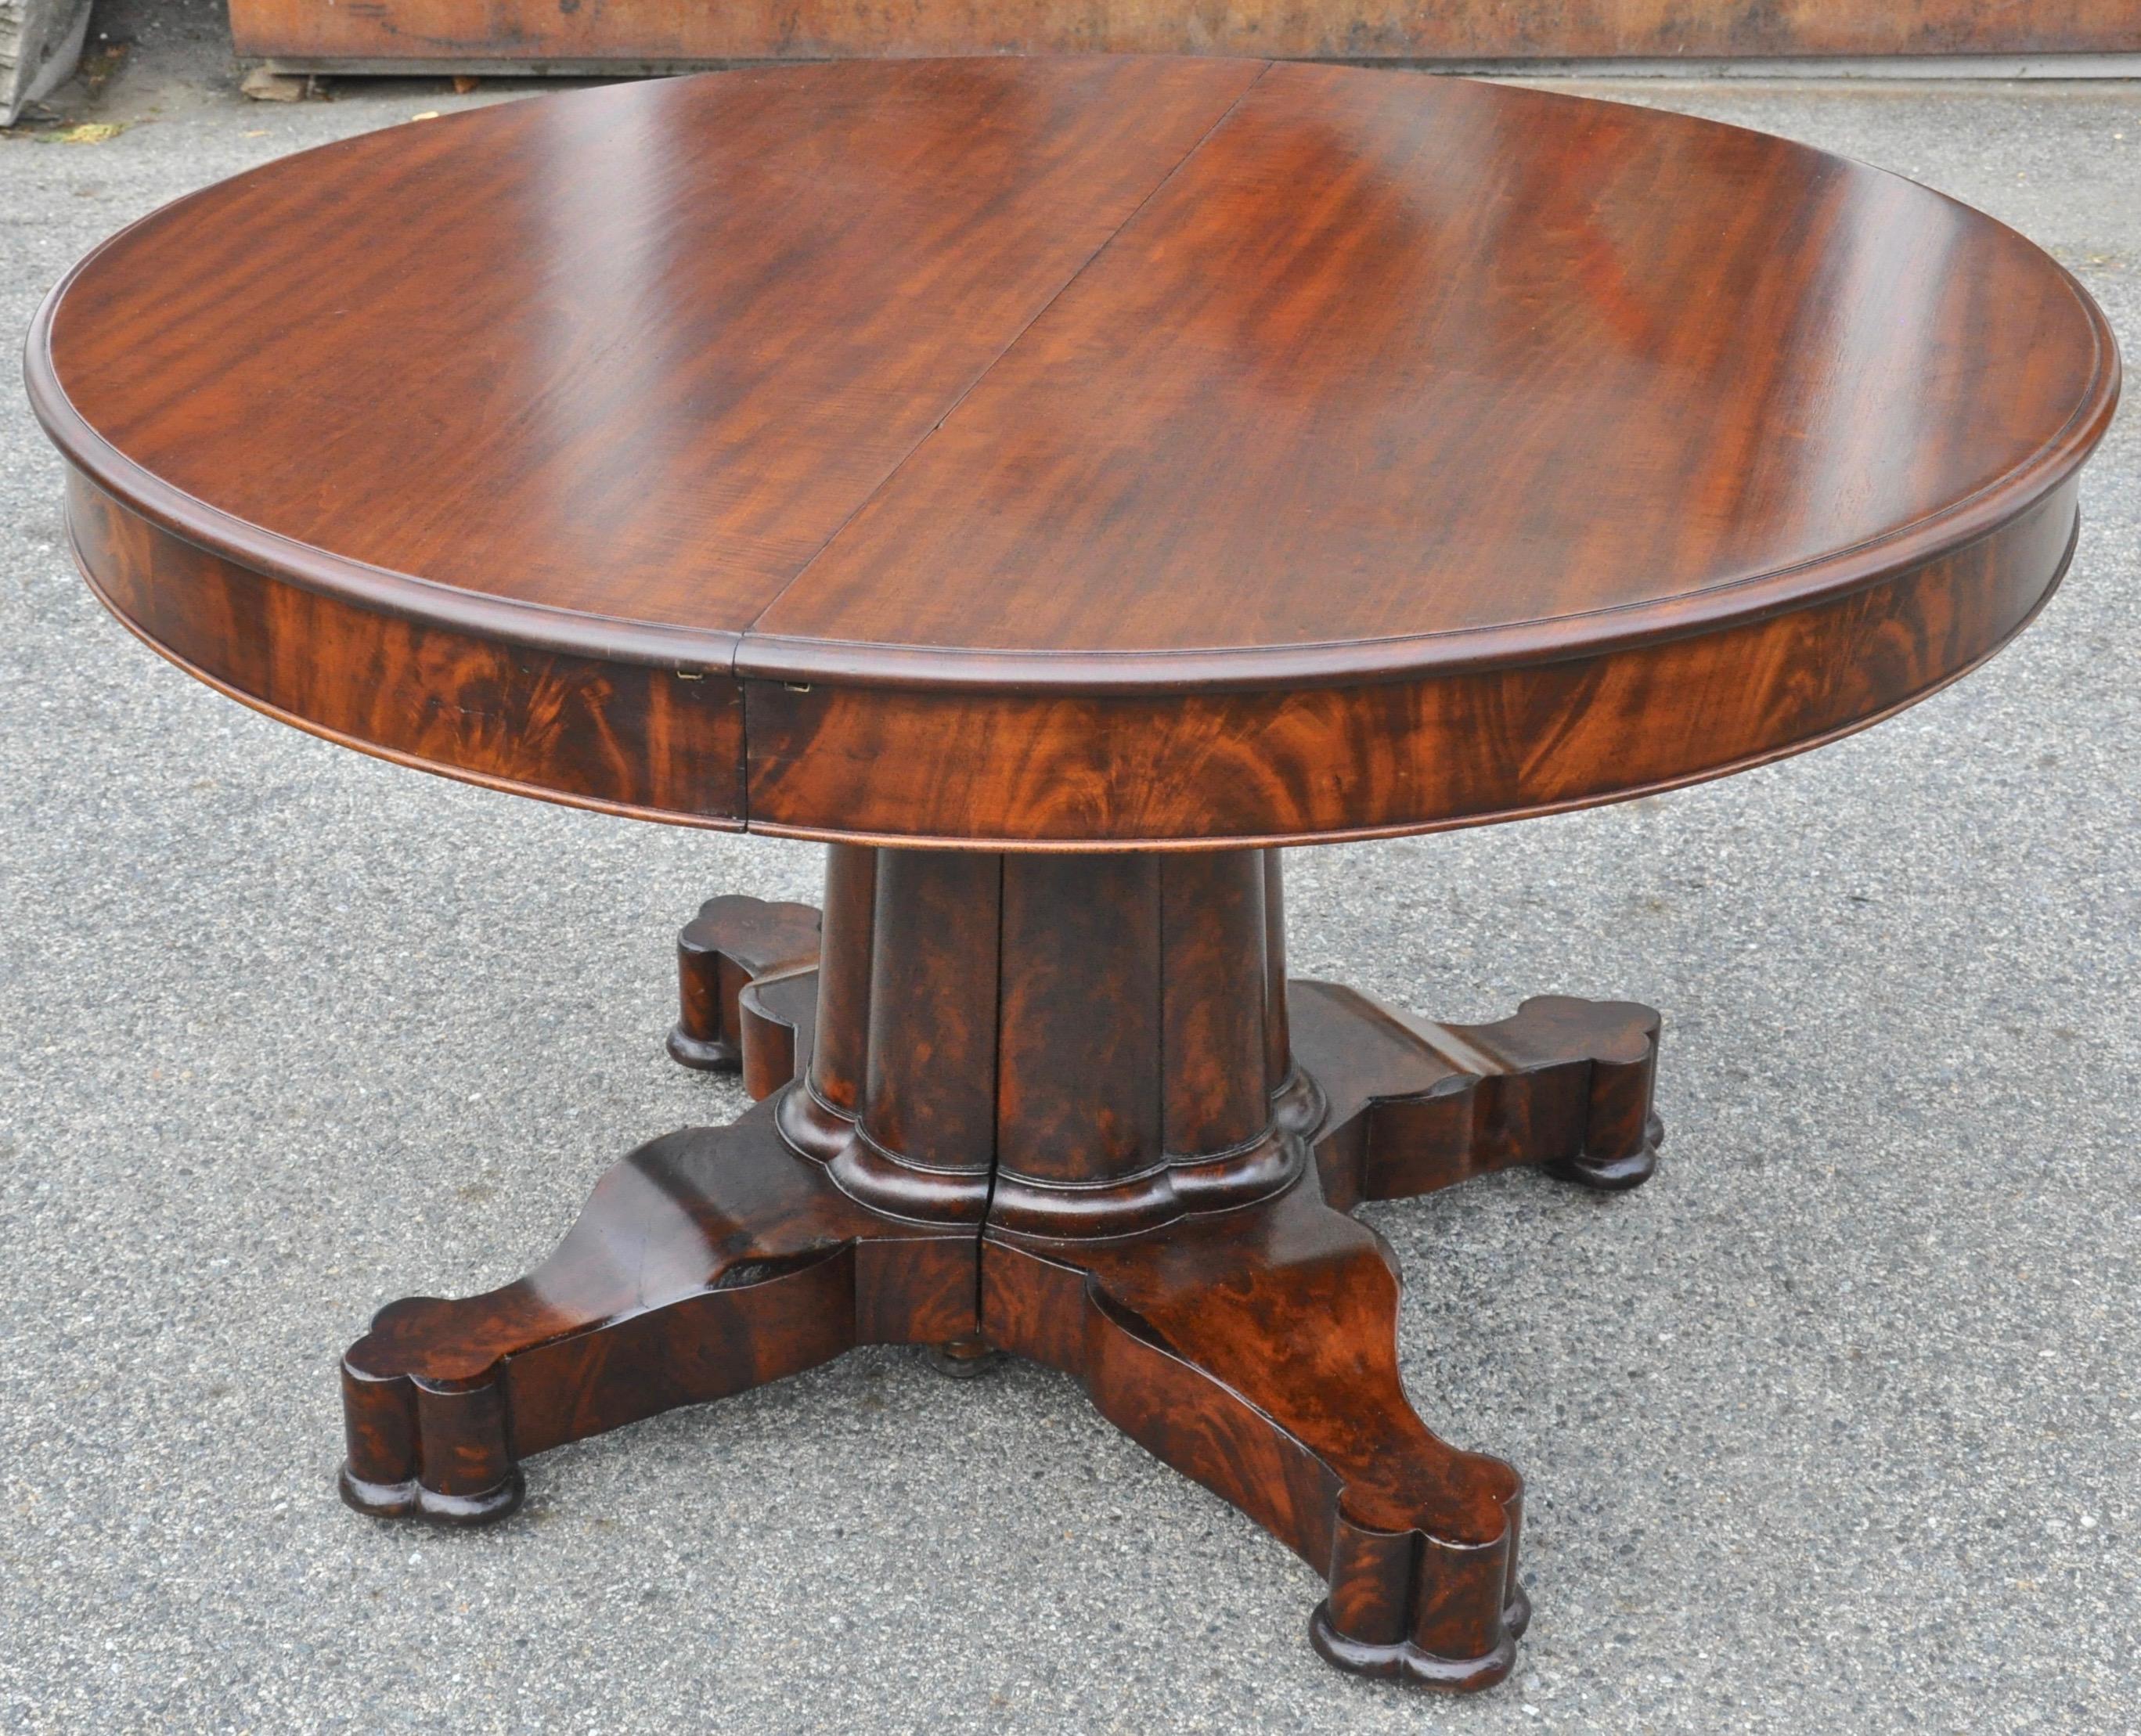 Period American Early 19th Century Round Extension Dining Table by Charles Hobe 2